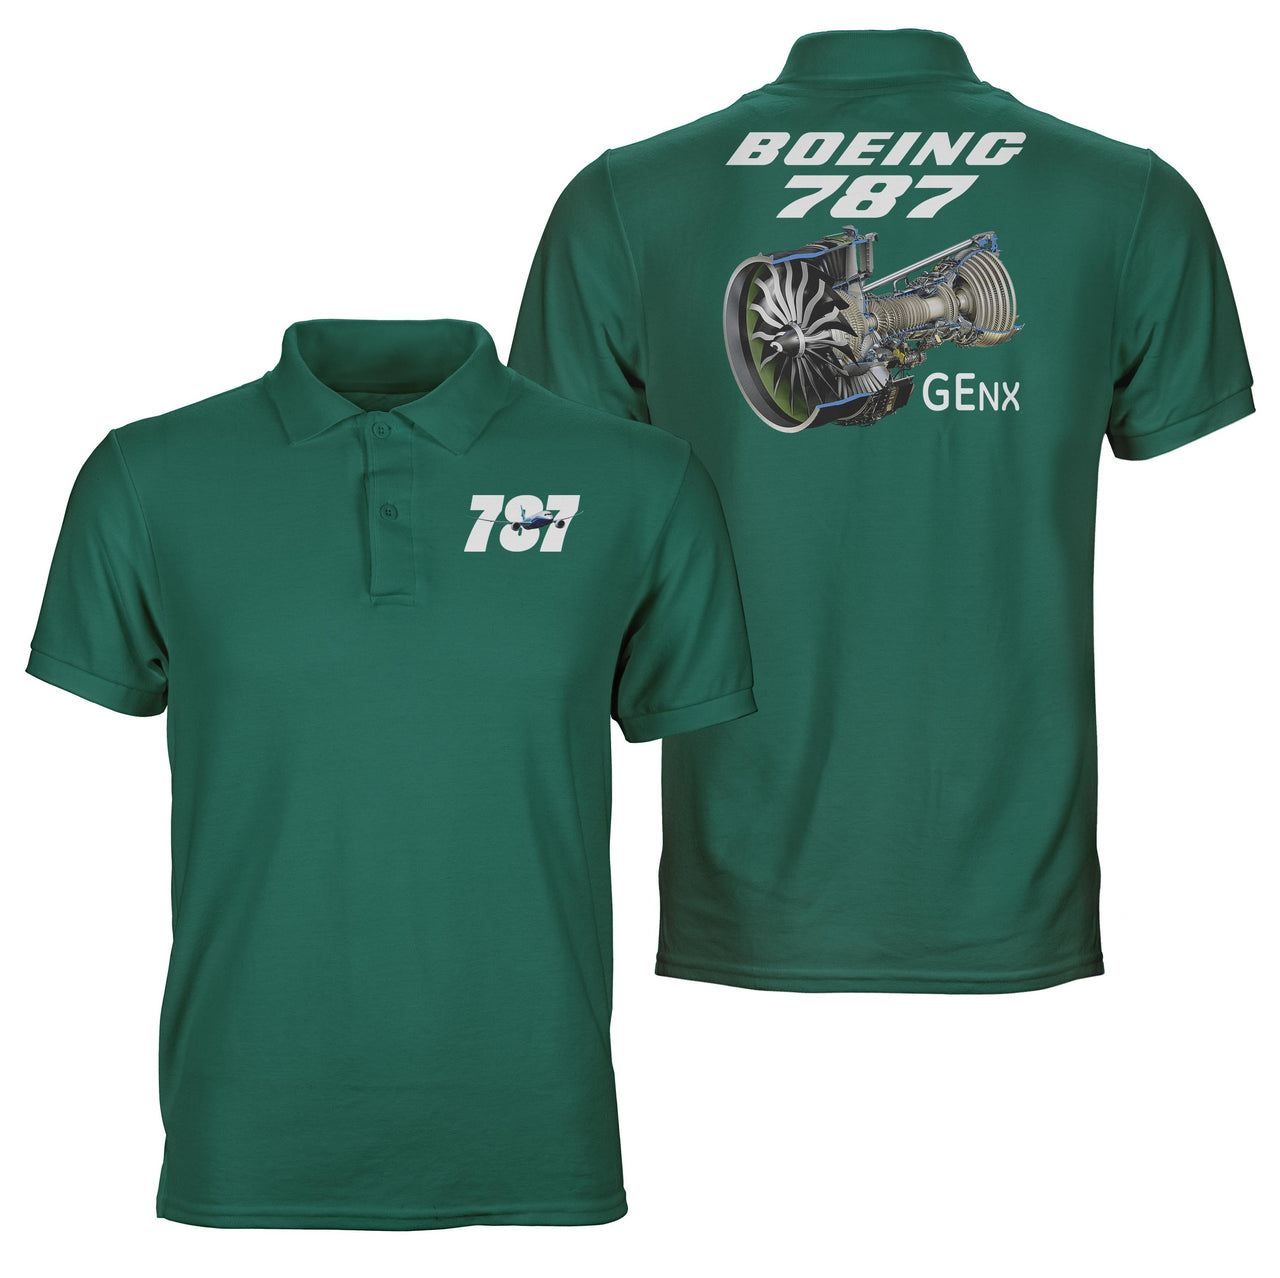 Boeing 787 & GENX Engine Designed Double Side Polo T-Shirts